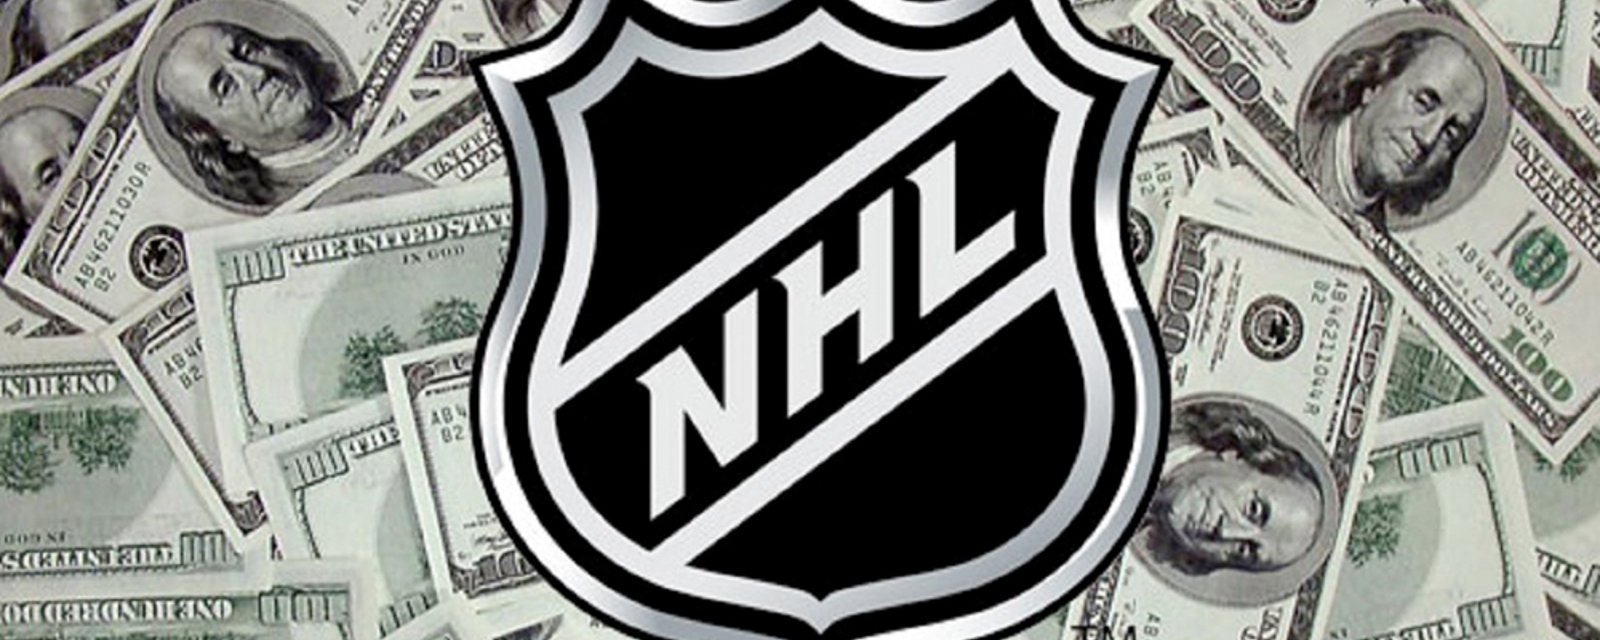 Report: NHL salary cap to increase, despite financial difficulties 